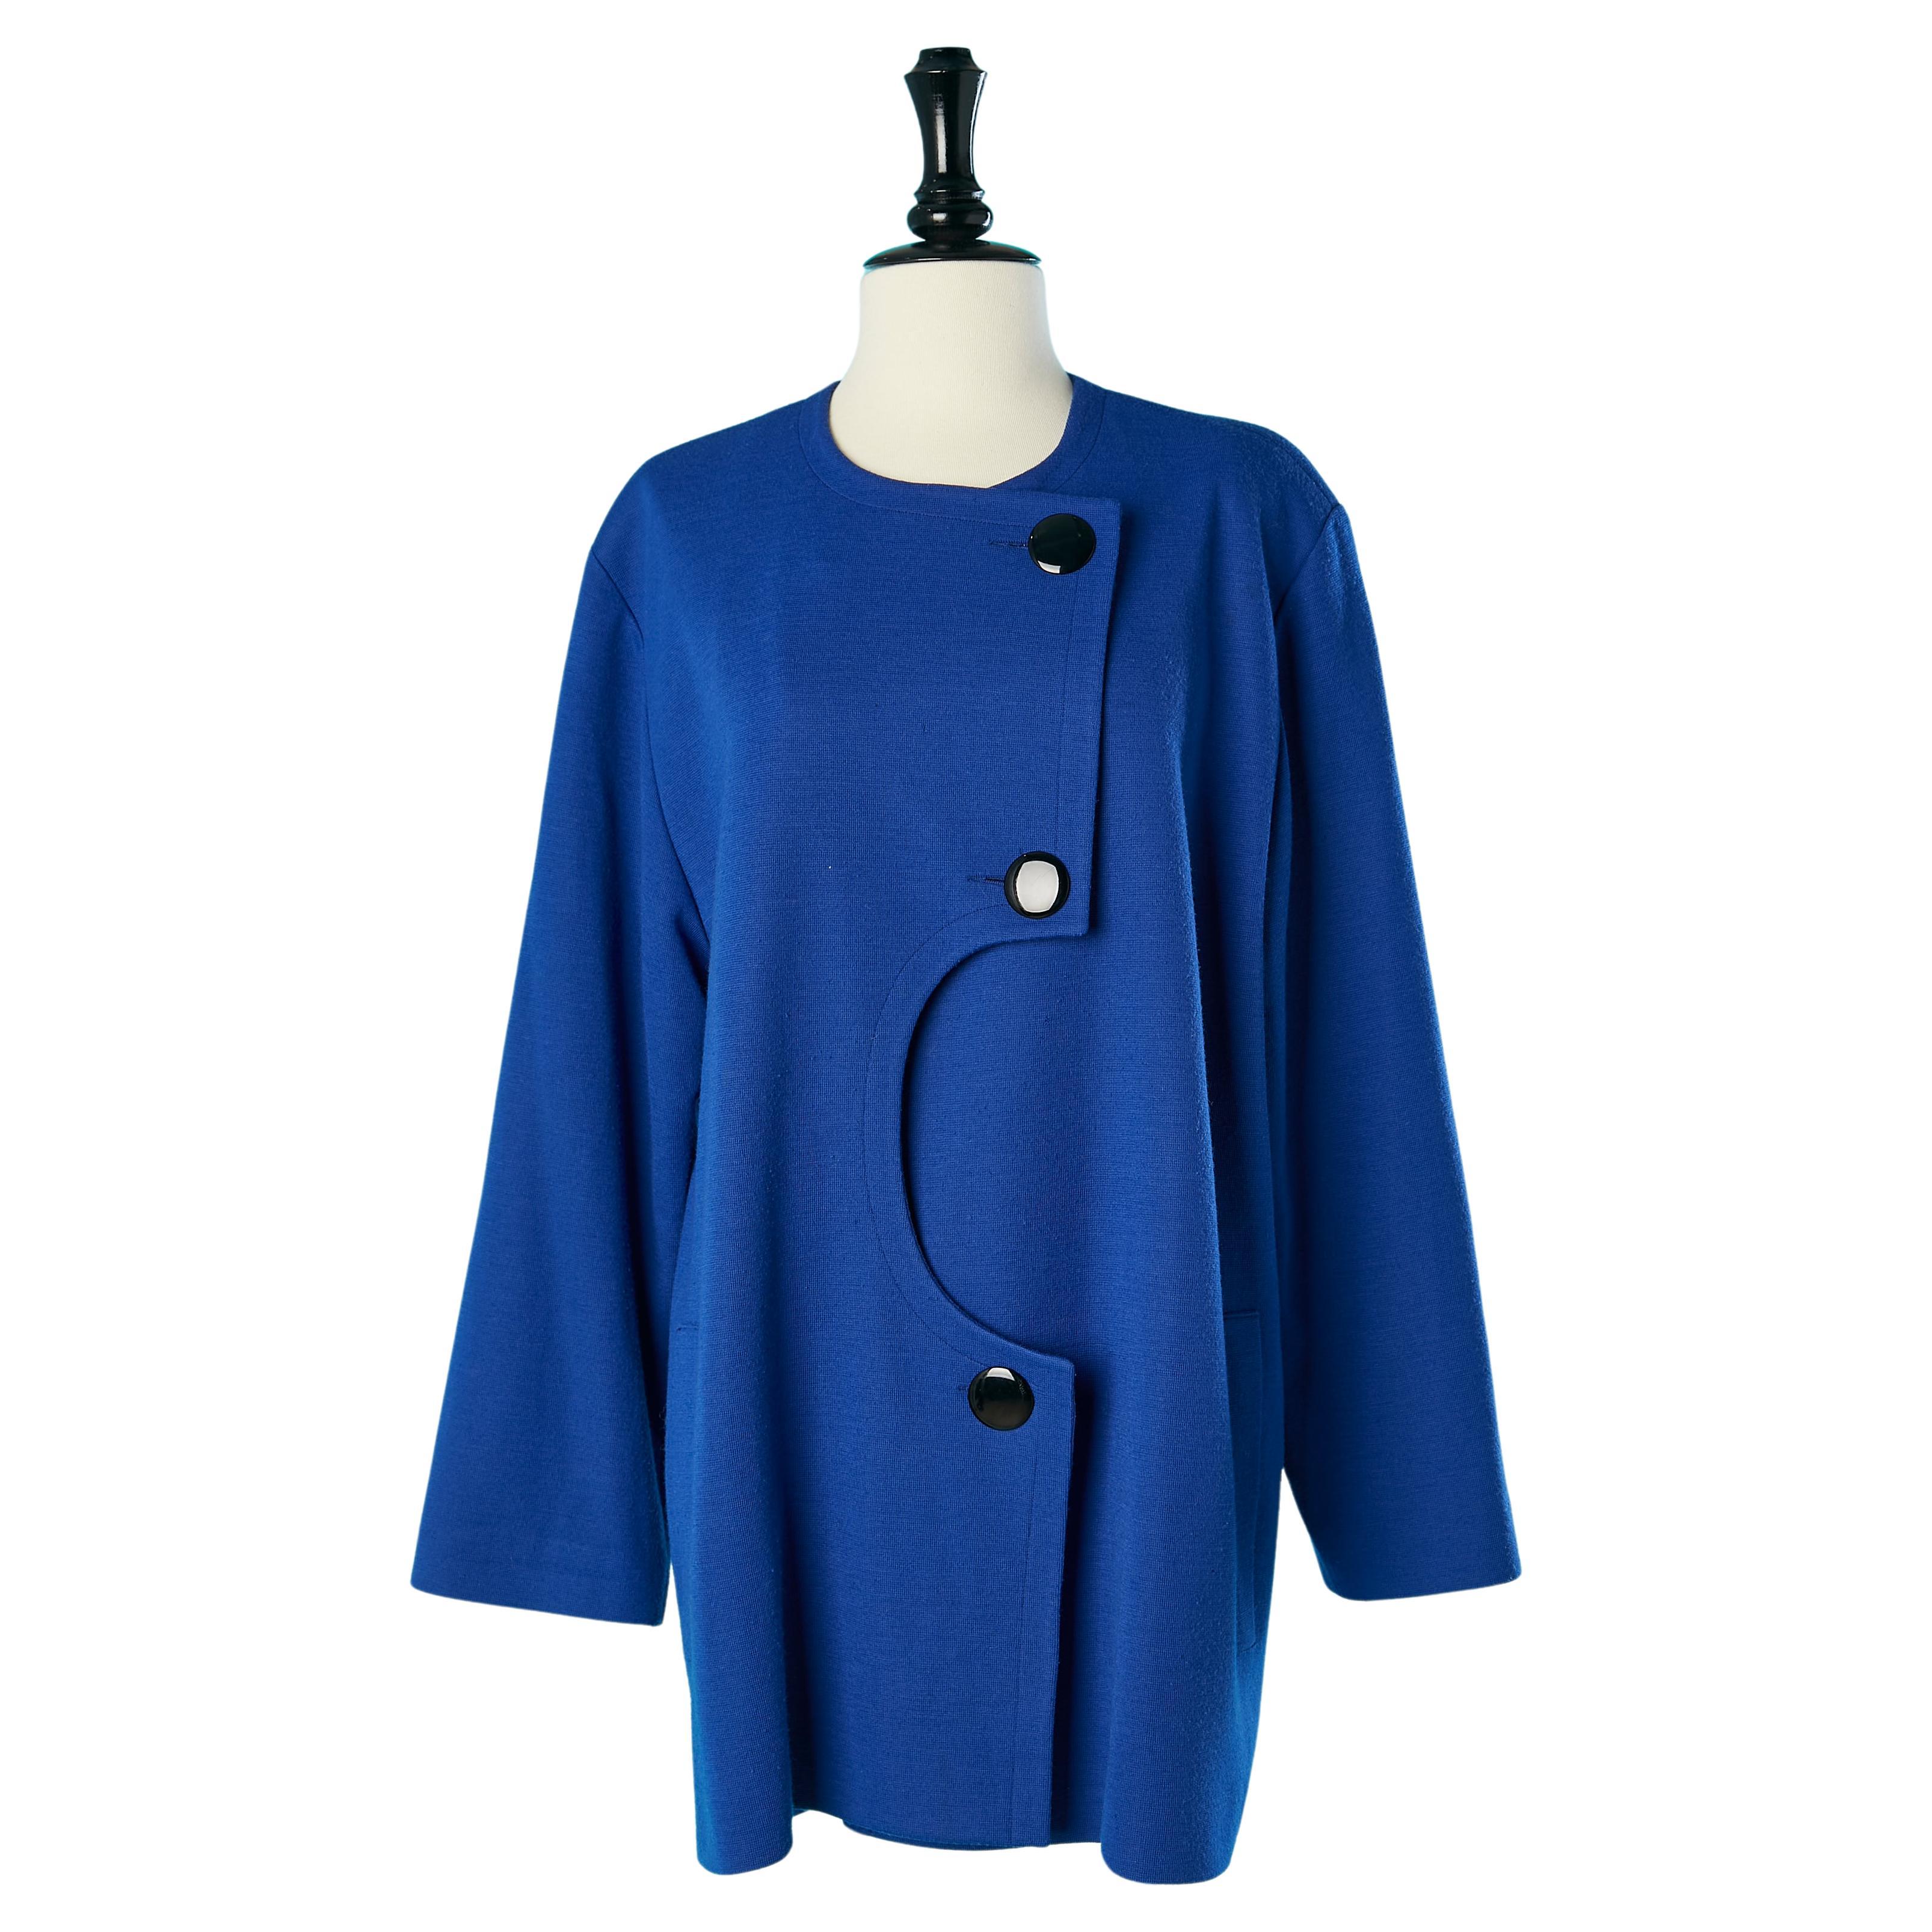 Bright blue wool & acrylic jersey jacket with cut-work Pierre Cardin Paris  For Sale